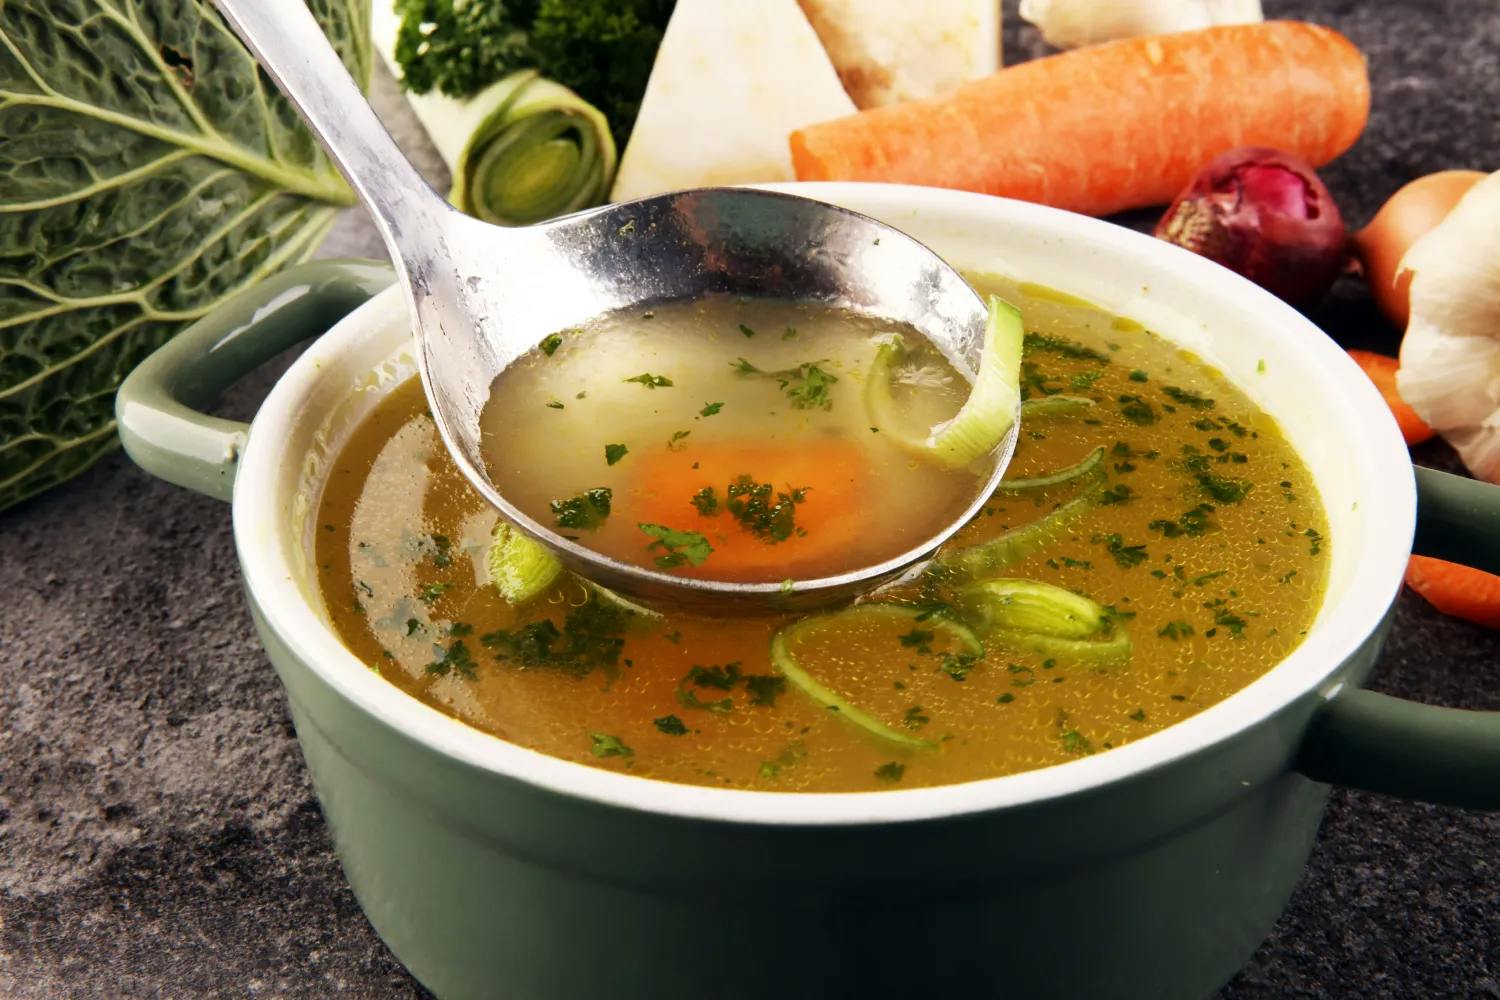 How To Use Your HSA for Bone Broth